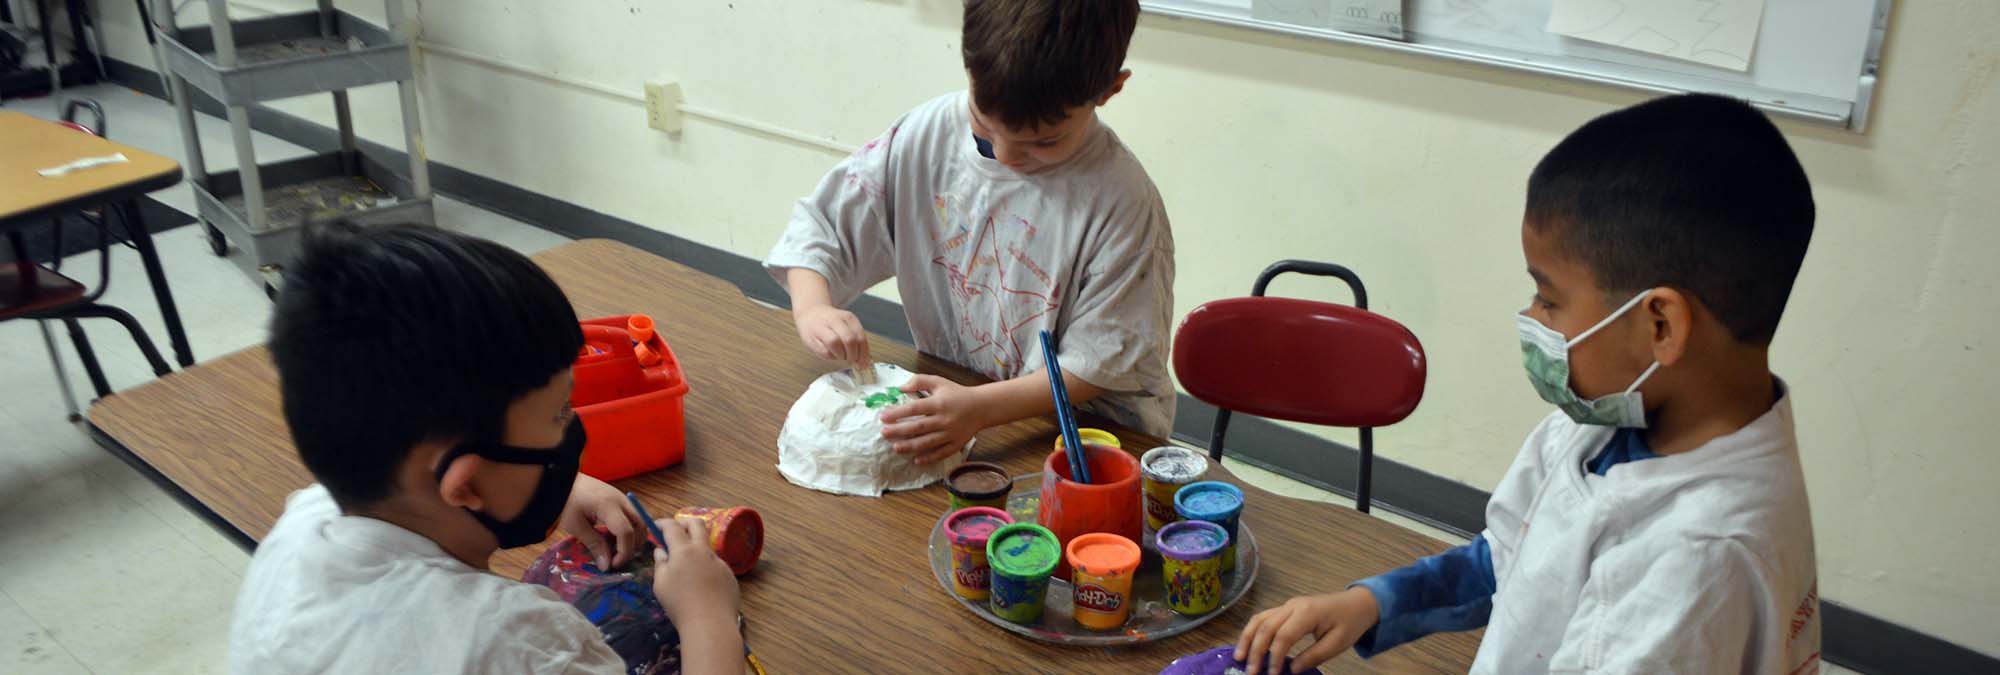 Students crafting with paper in art class